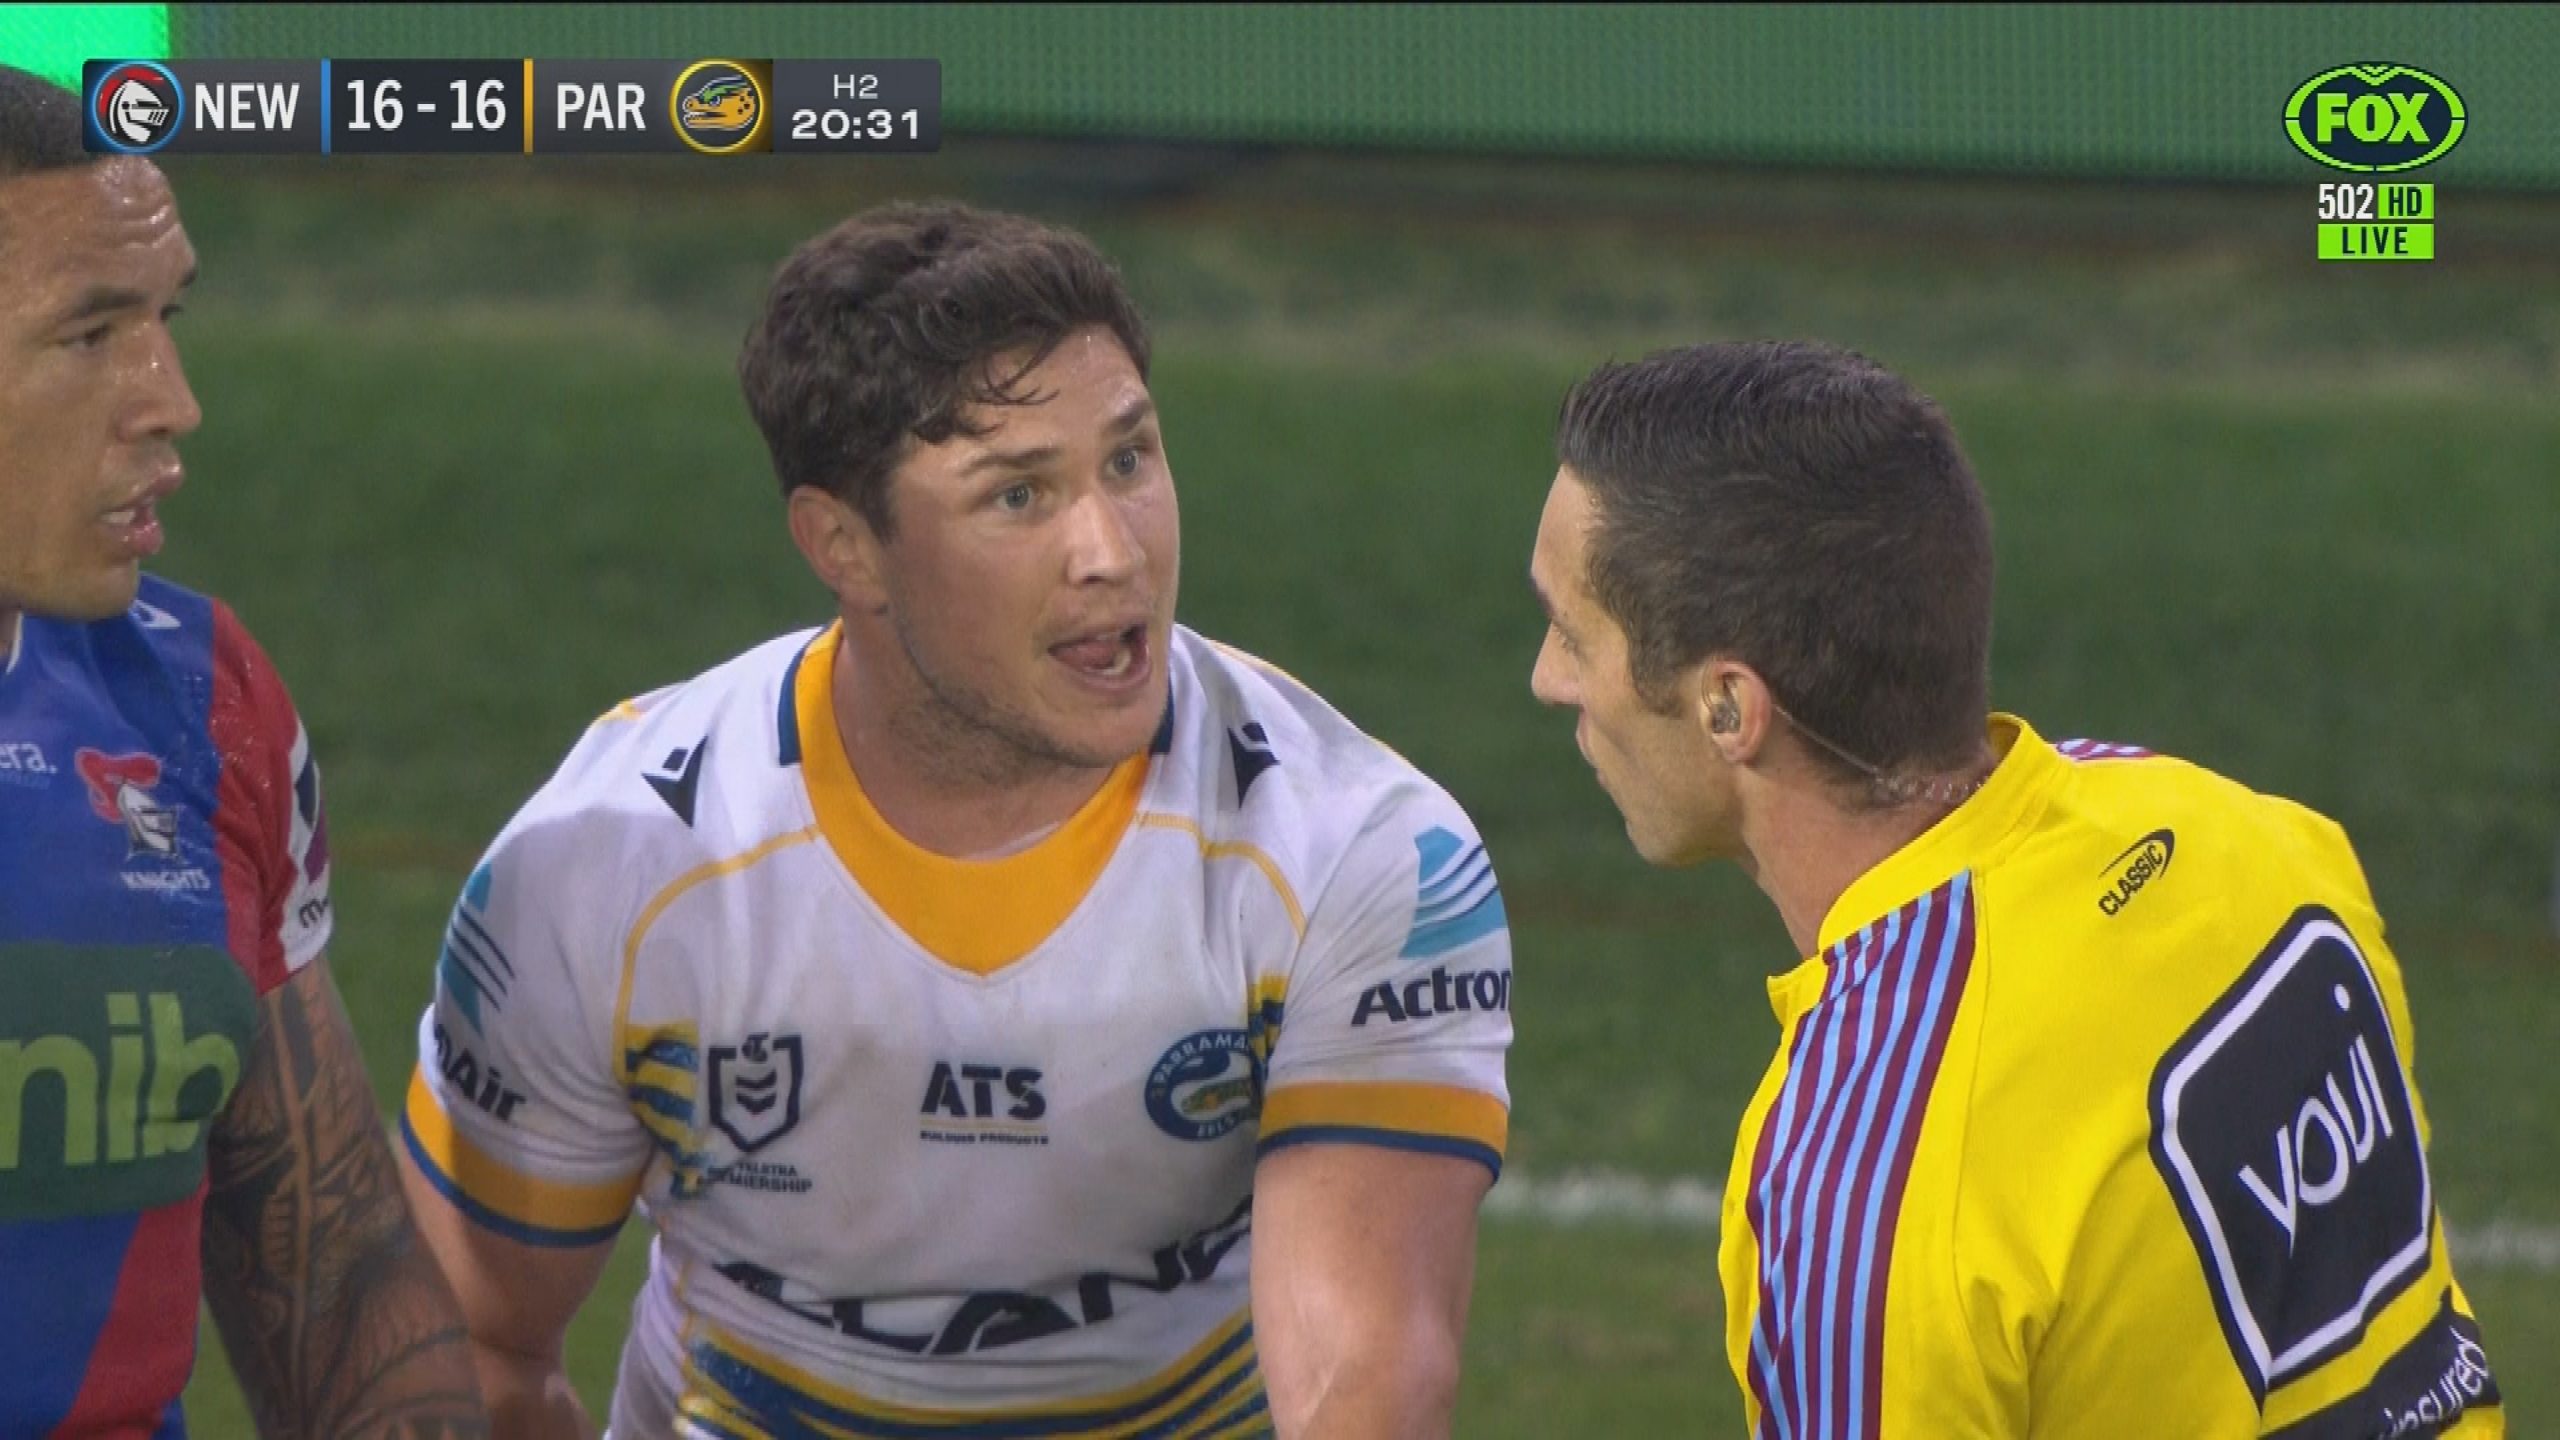 Blaize Talagi was denied a try by the Bunker, who judged he'd knocked on. Mitchell Moses couldn't believe the call.